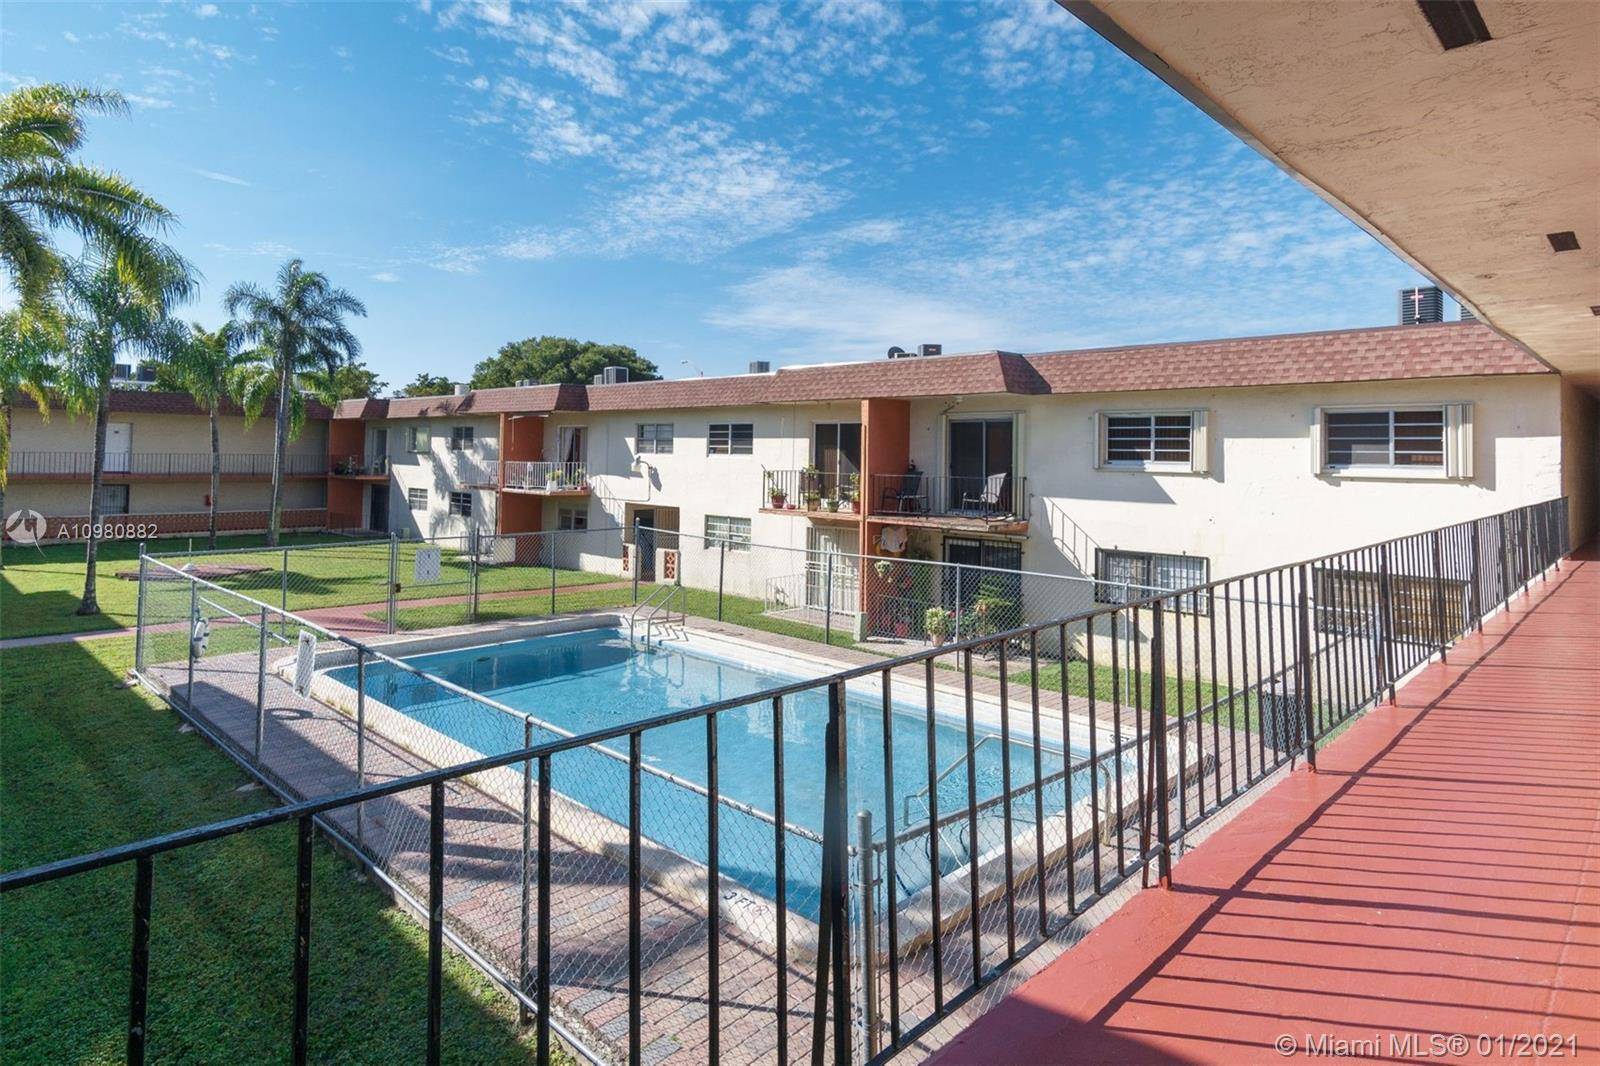 WELL KEPT, NEAT AND CLEAN 2 BEDROOM AND 1 FULL BATH CONDO IN HIALEAH.